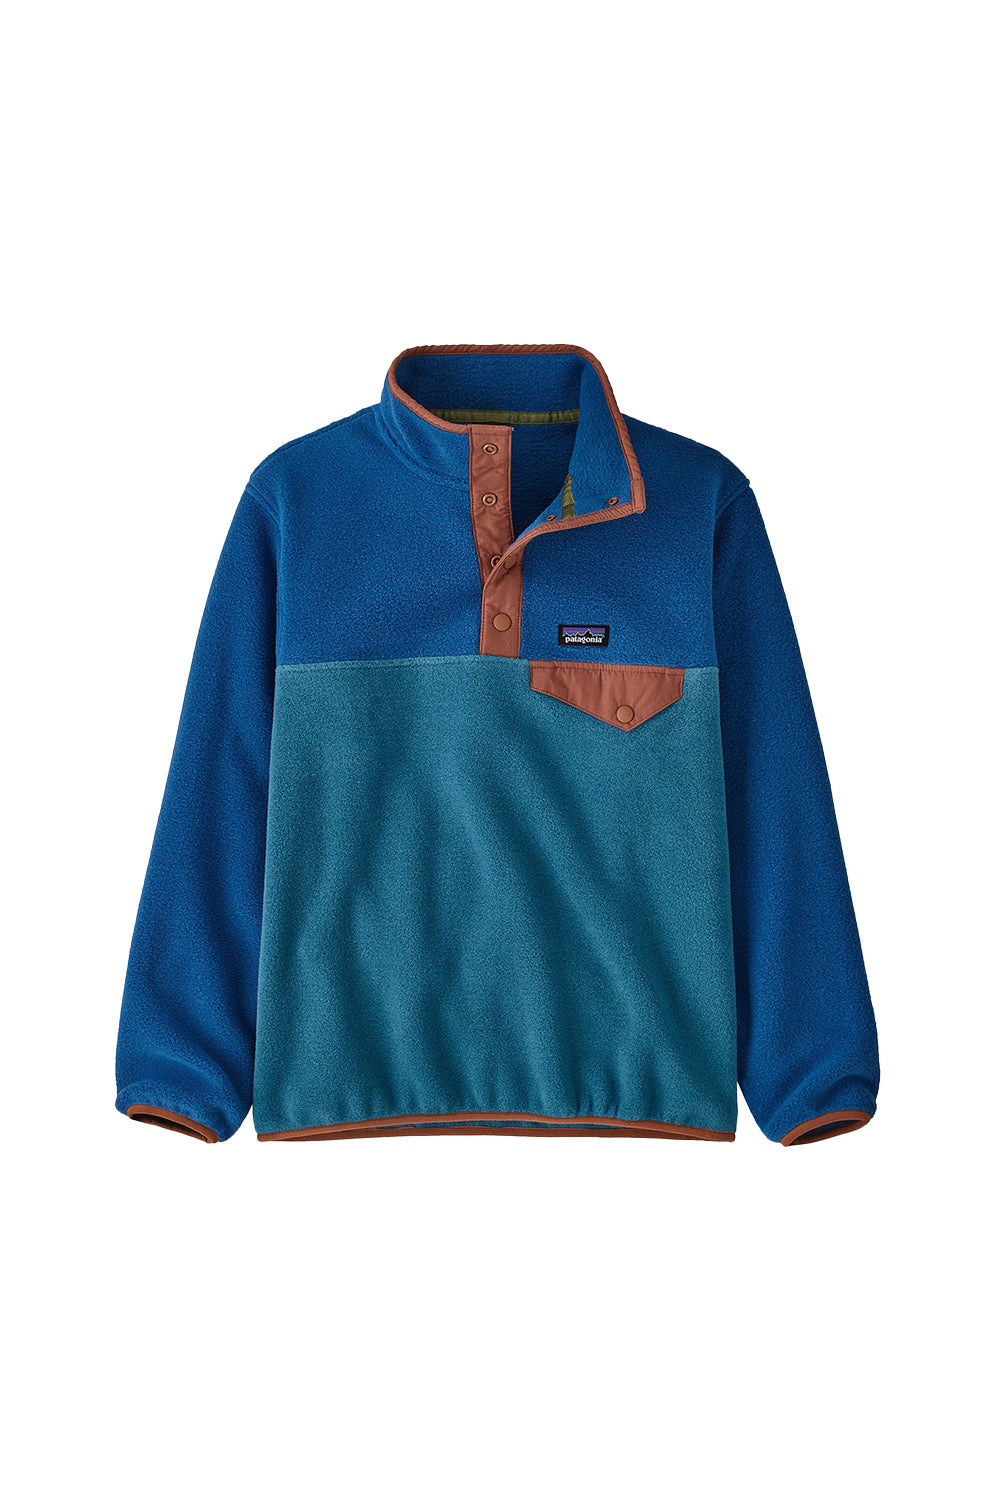 Patagonia Kids' Lightweight Synchilla Snap-T Pullover